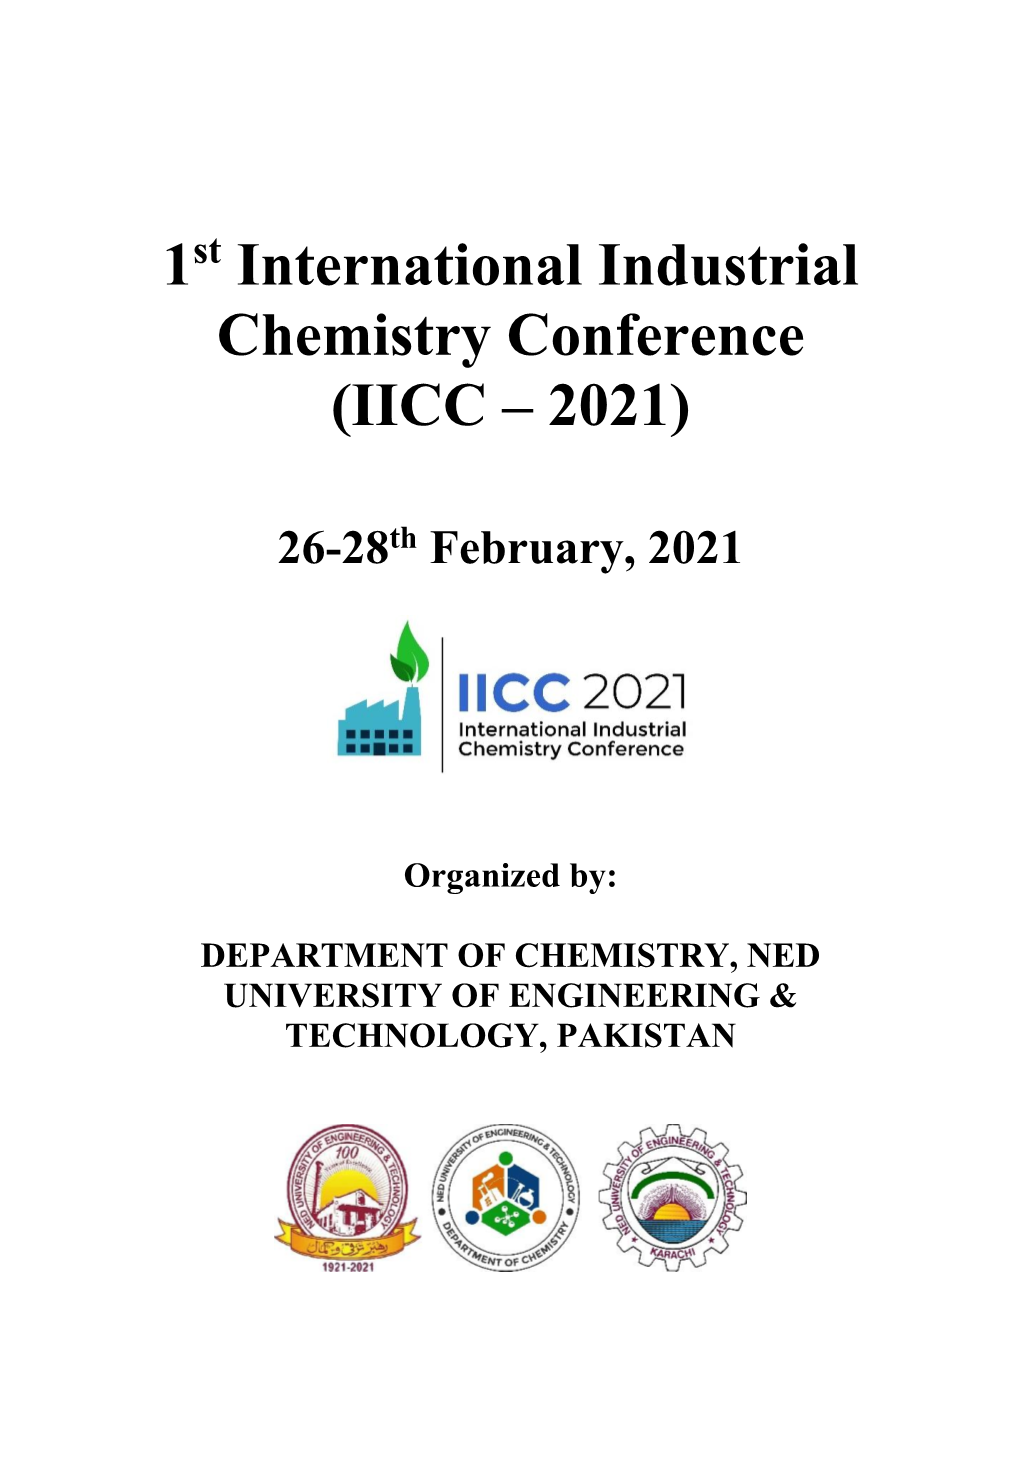 1 International Industrial Chemistry Conference (IICC – 2021)